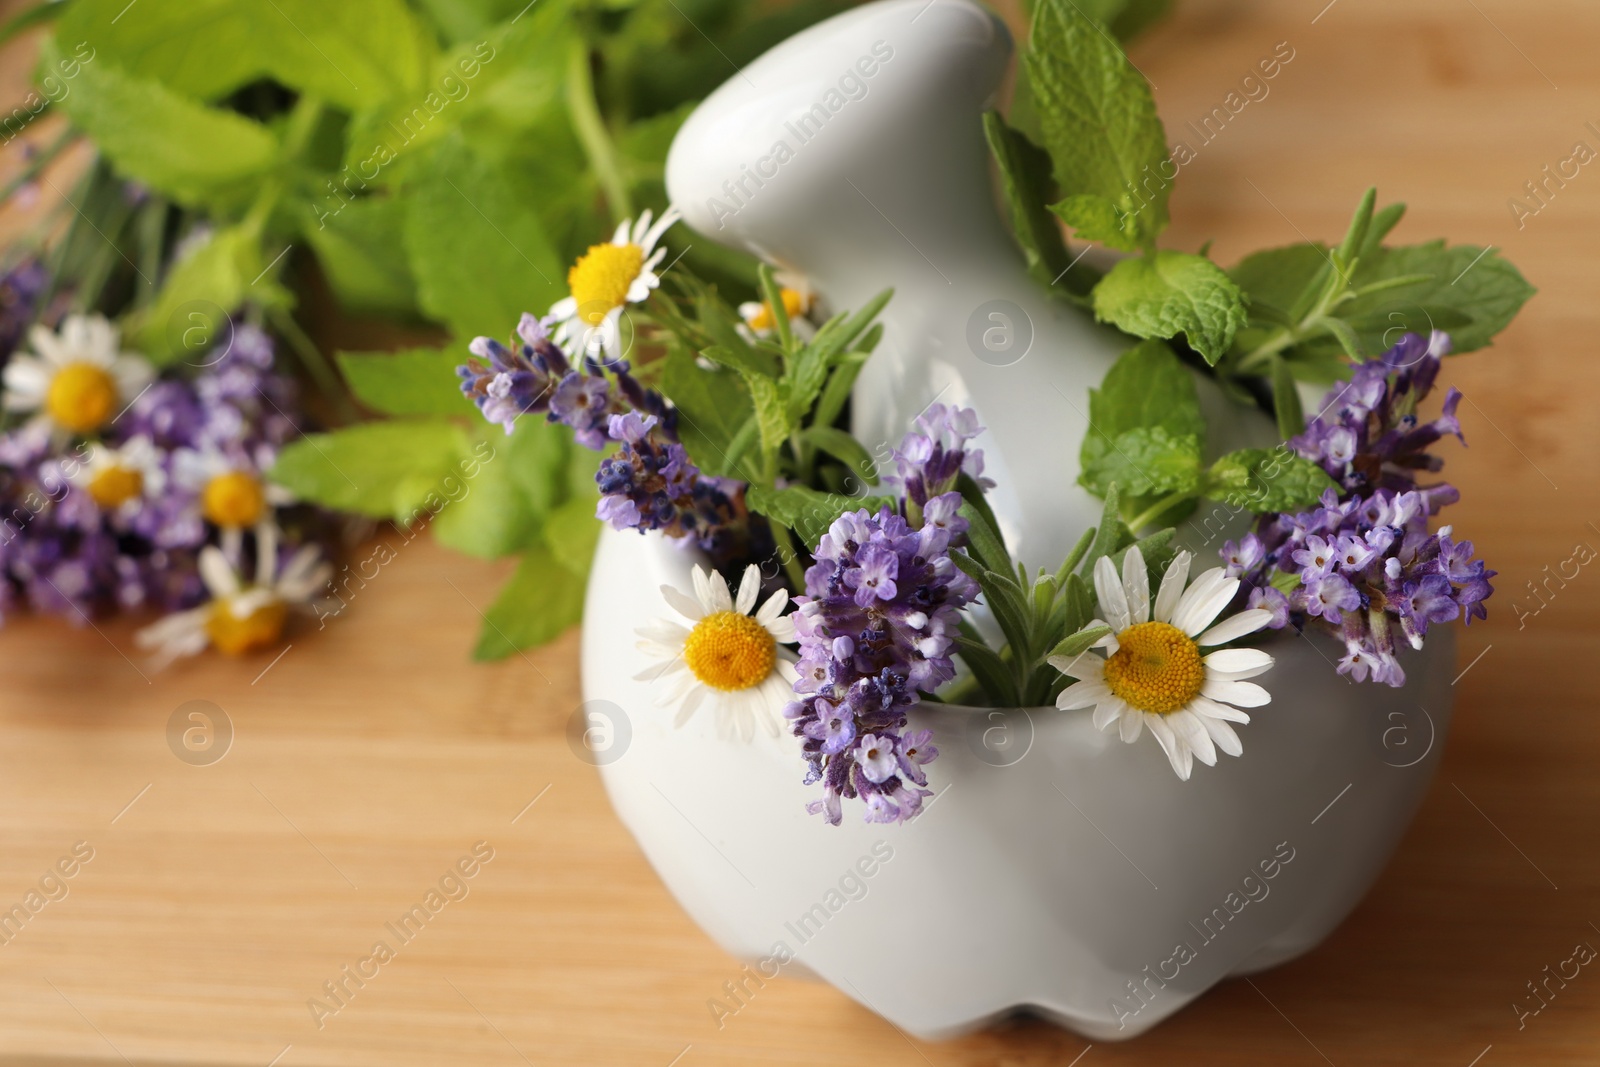 Photo of Mortar with fresh lavender, chamomile flowers, herbs and pestle on wooden table, closeup